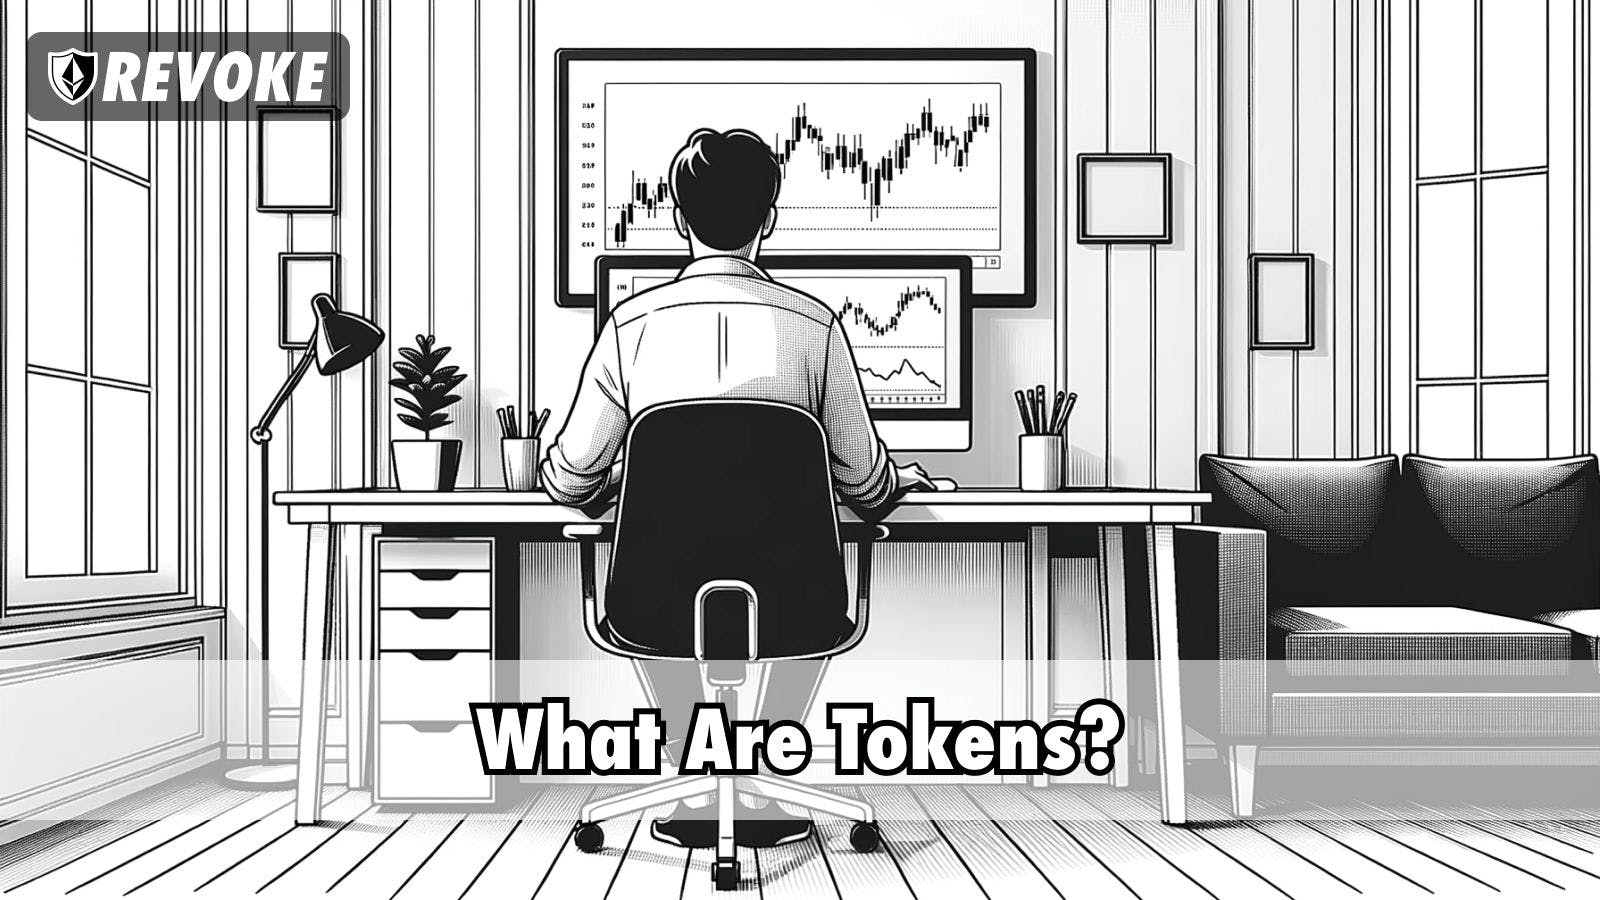 What Are Tokens?